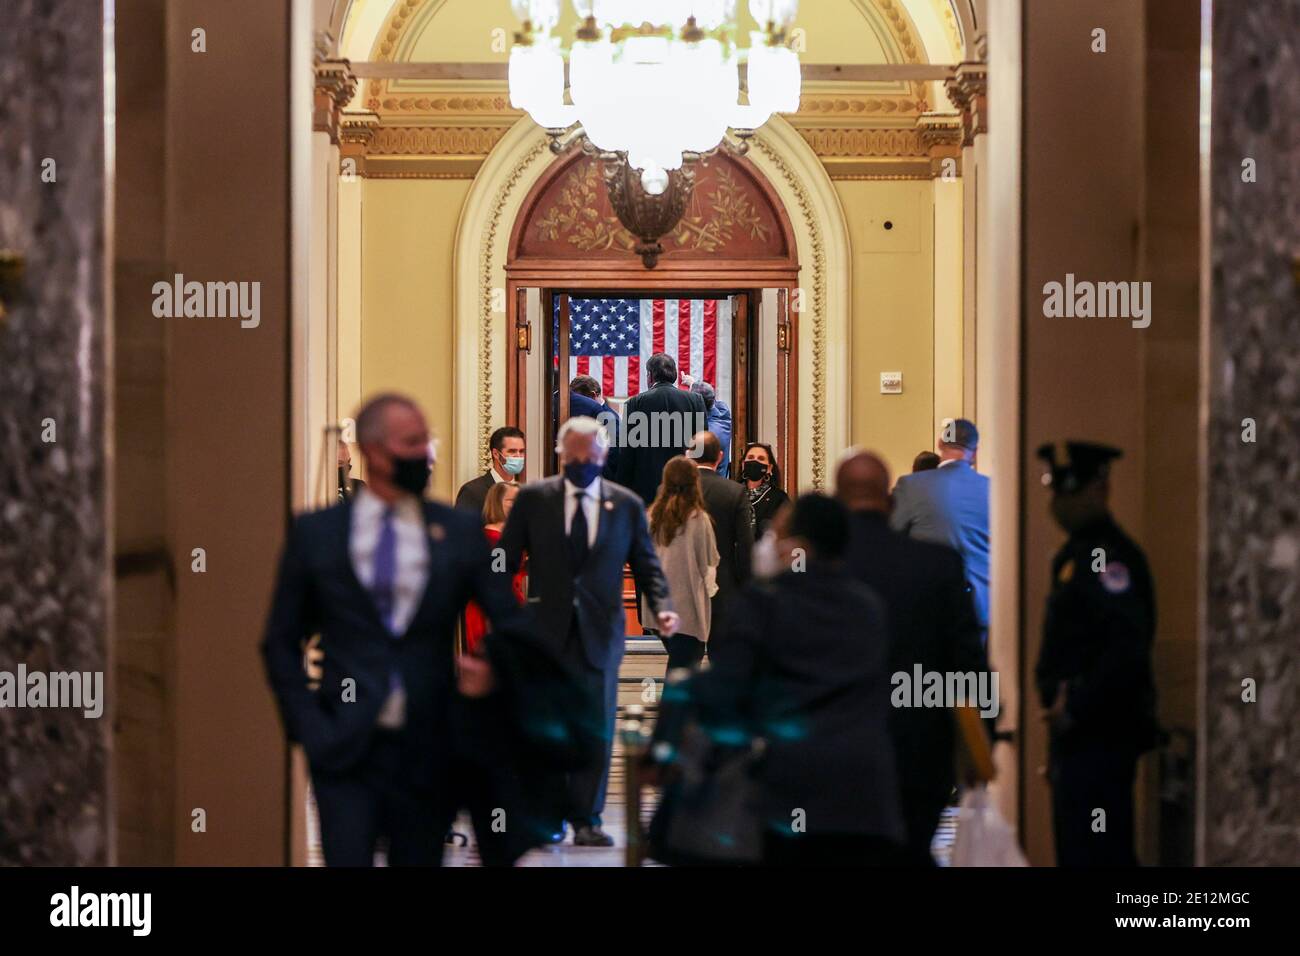 WASHINGTON, DC - JANUARY 03: Members and guests wait outside the House chamber in the US Capitol on January 03, 2021 in Washington, DC. Both chambers are holding rare Sunday sessions to open the new Congress on January 3 as the Constitution requires.  (Photo by Tasos Katopodis/Pool/Sipa USA) Stock Photo